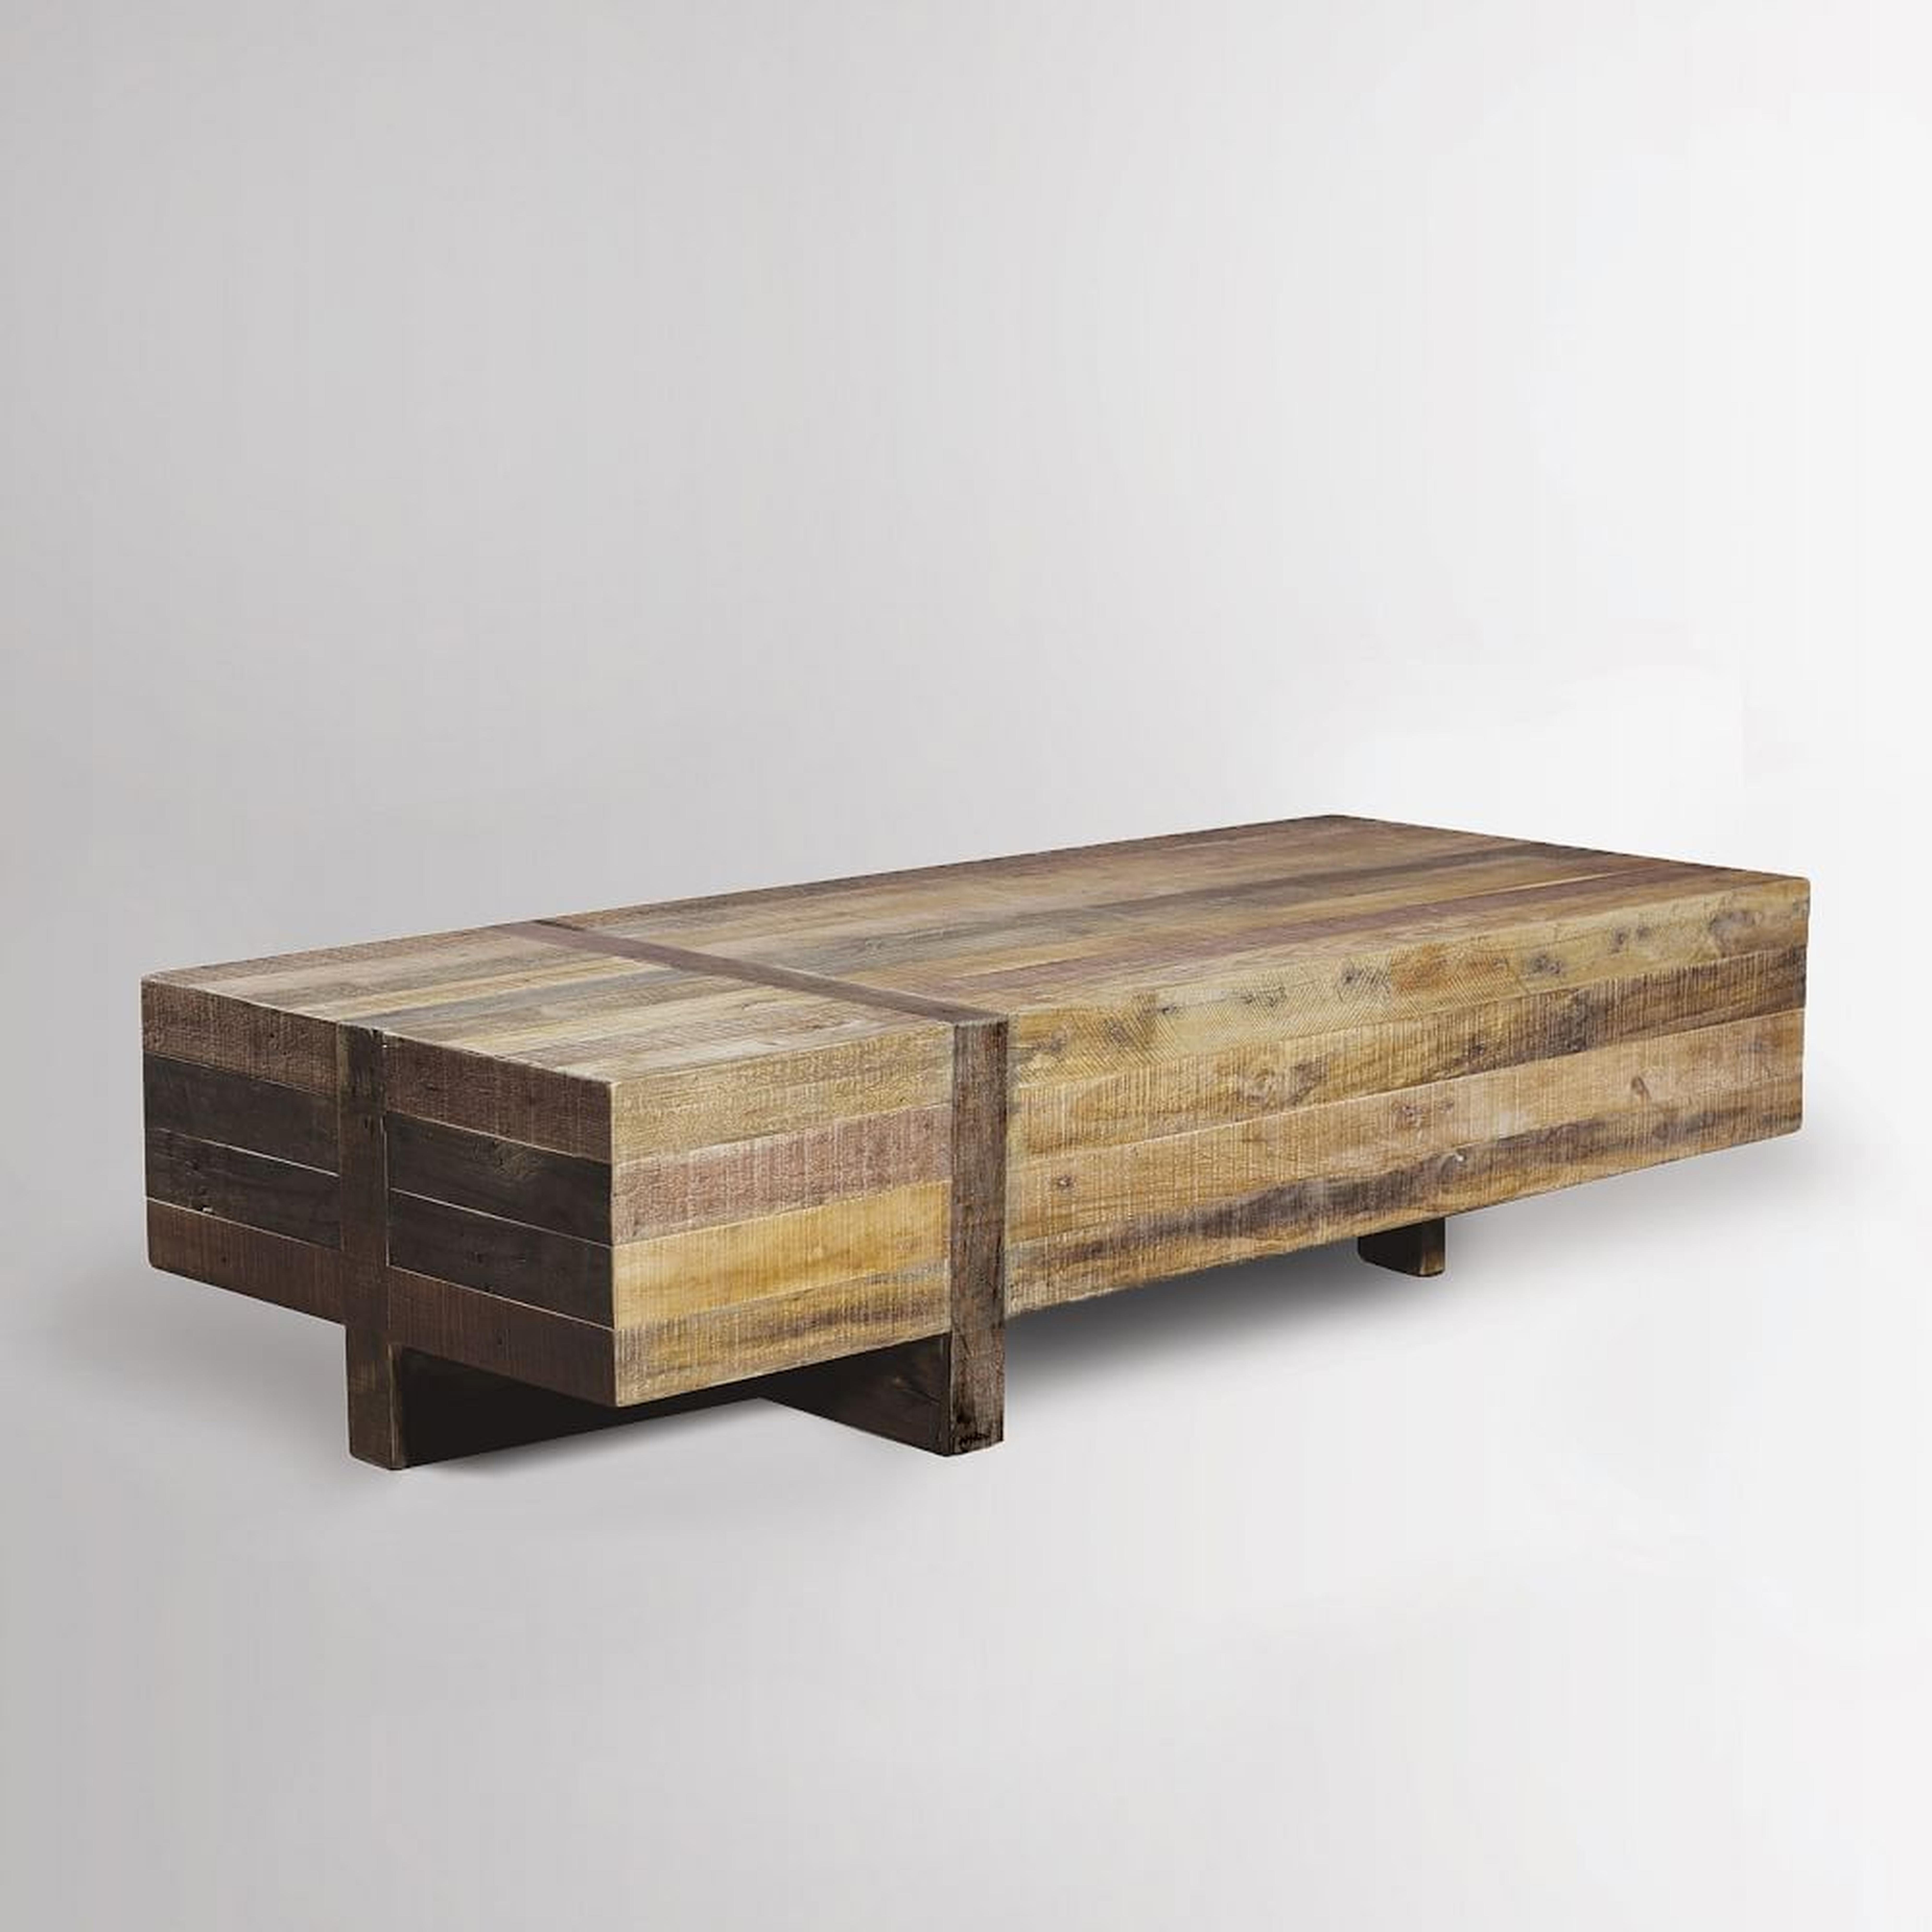 Emmerson Block Coffee Table - West Elm